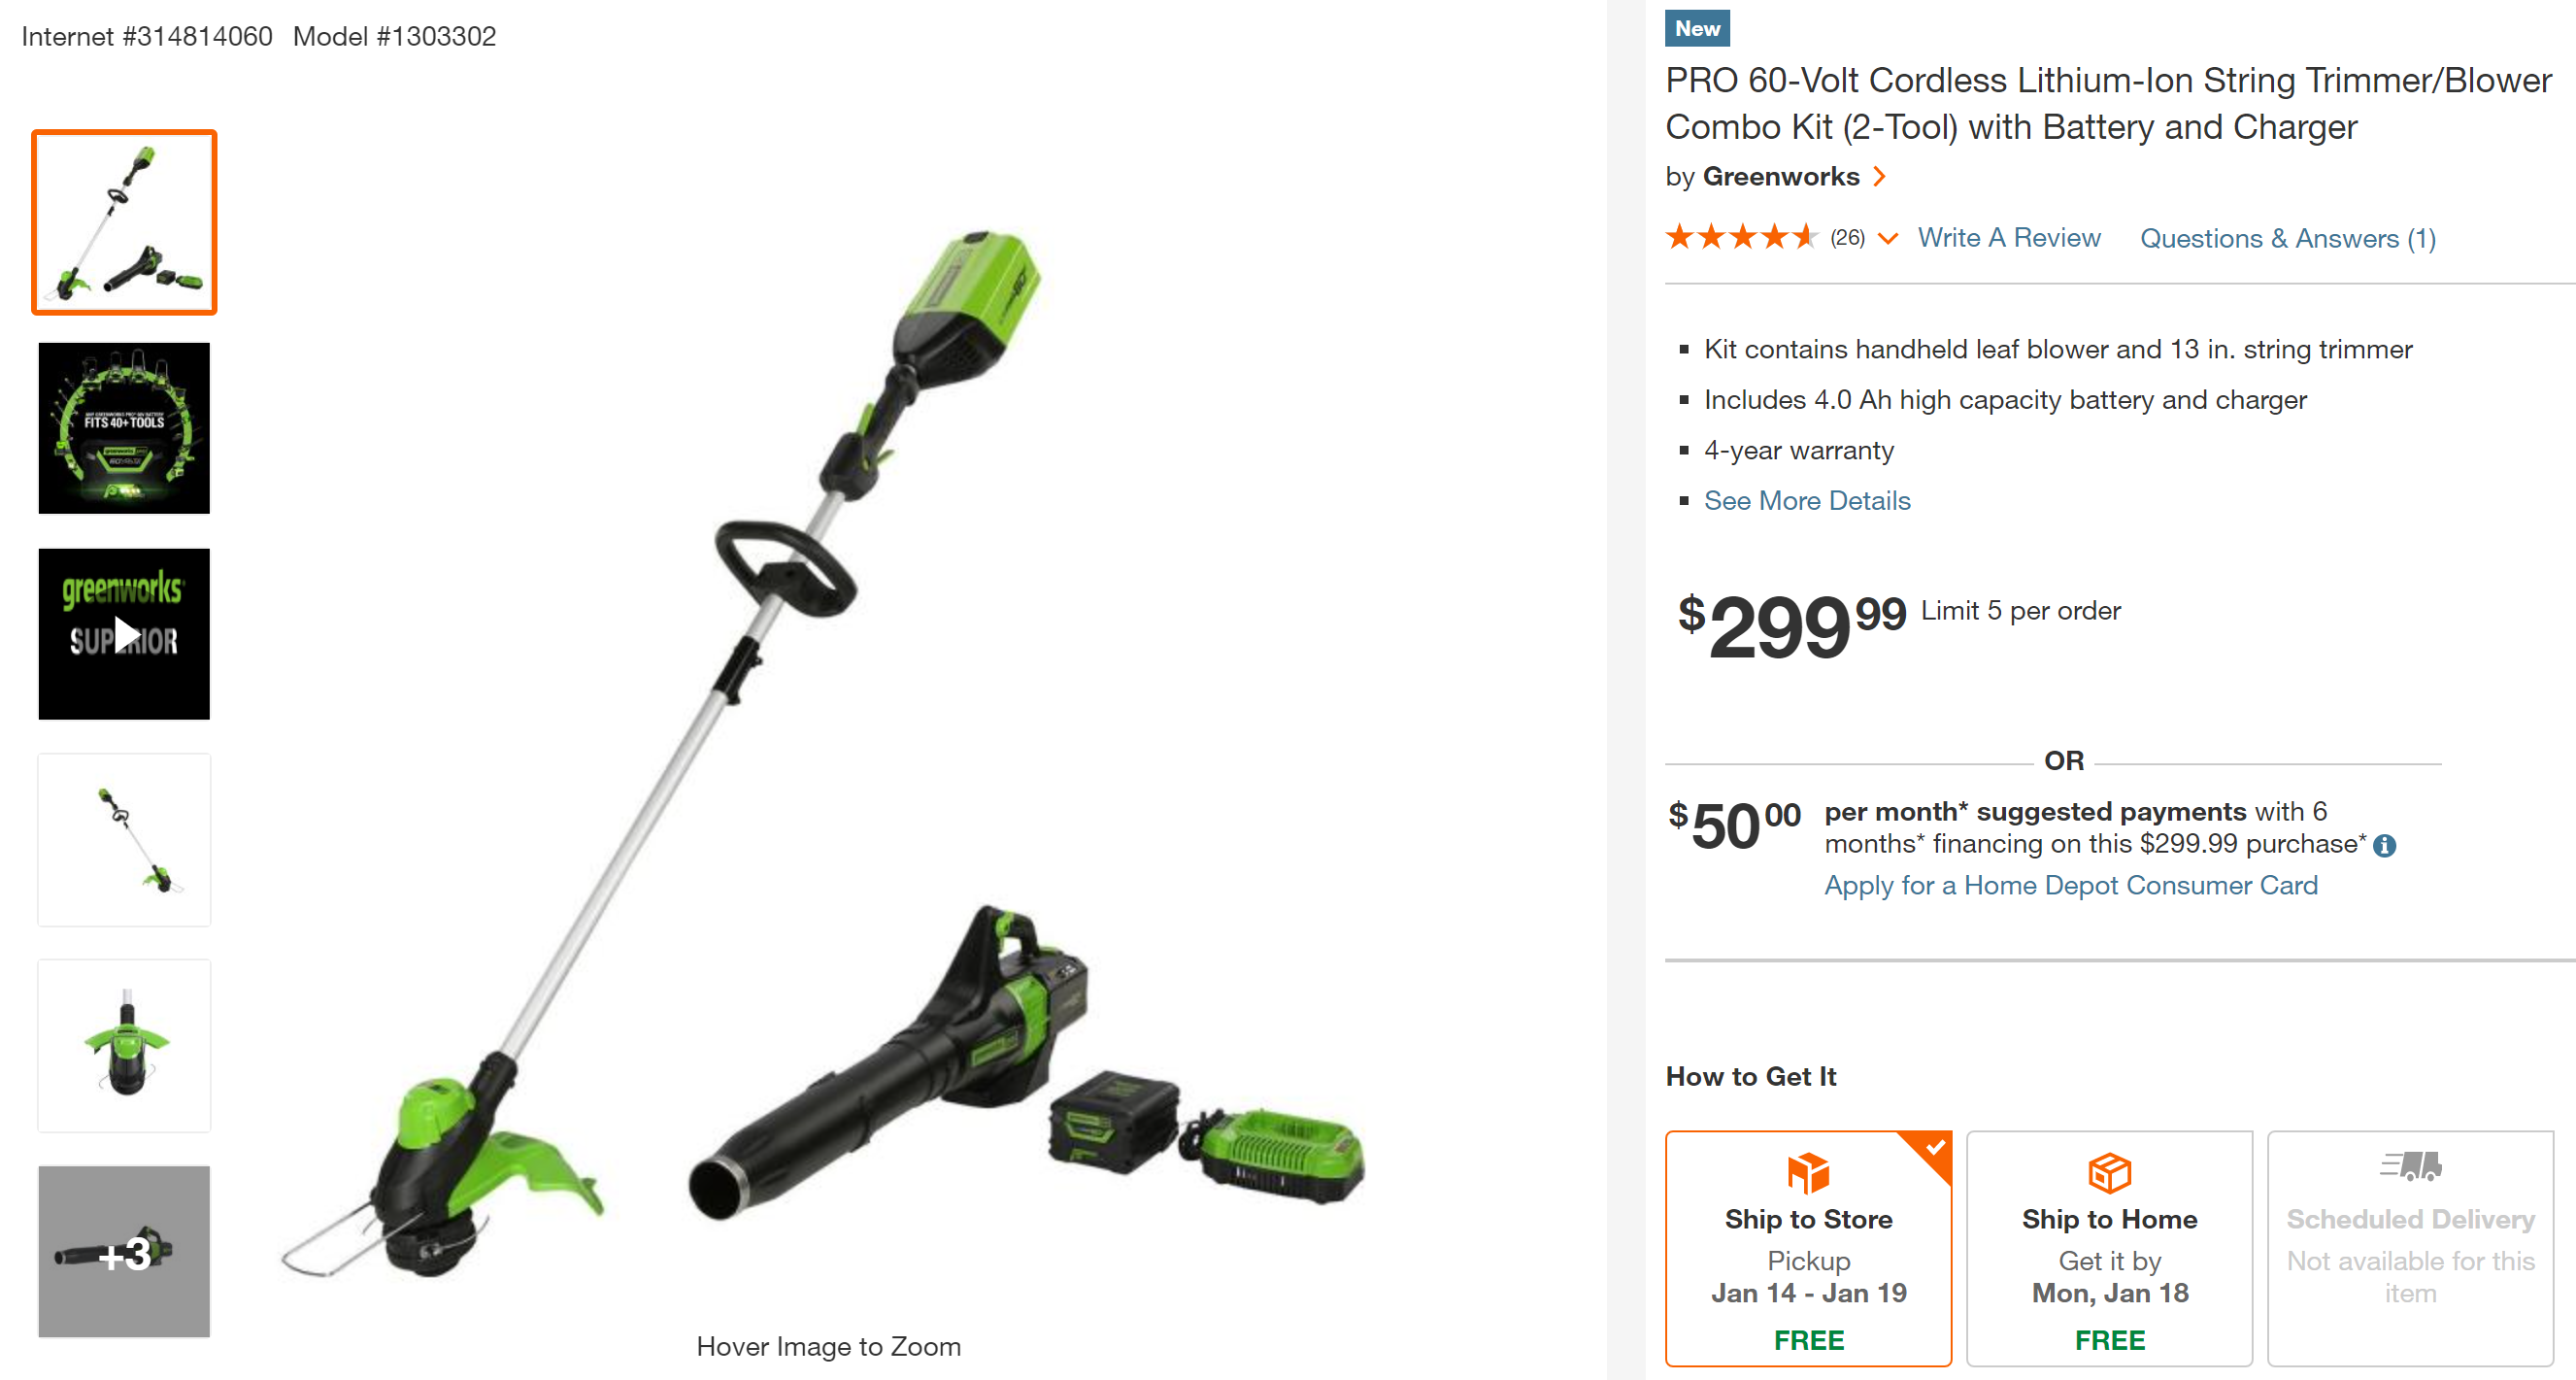 2021-01-05 11_41_40-Greenworks PRO 60-Volt Cordless Lithium-Ion String Trimmer_Blower Combo Kit (2-T.png